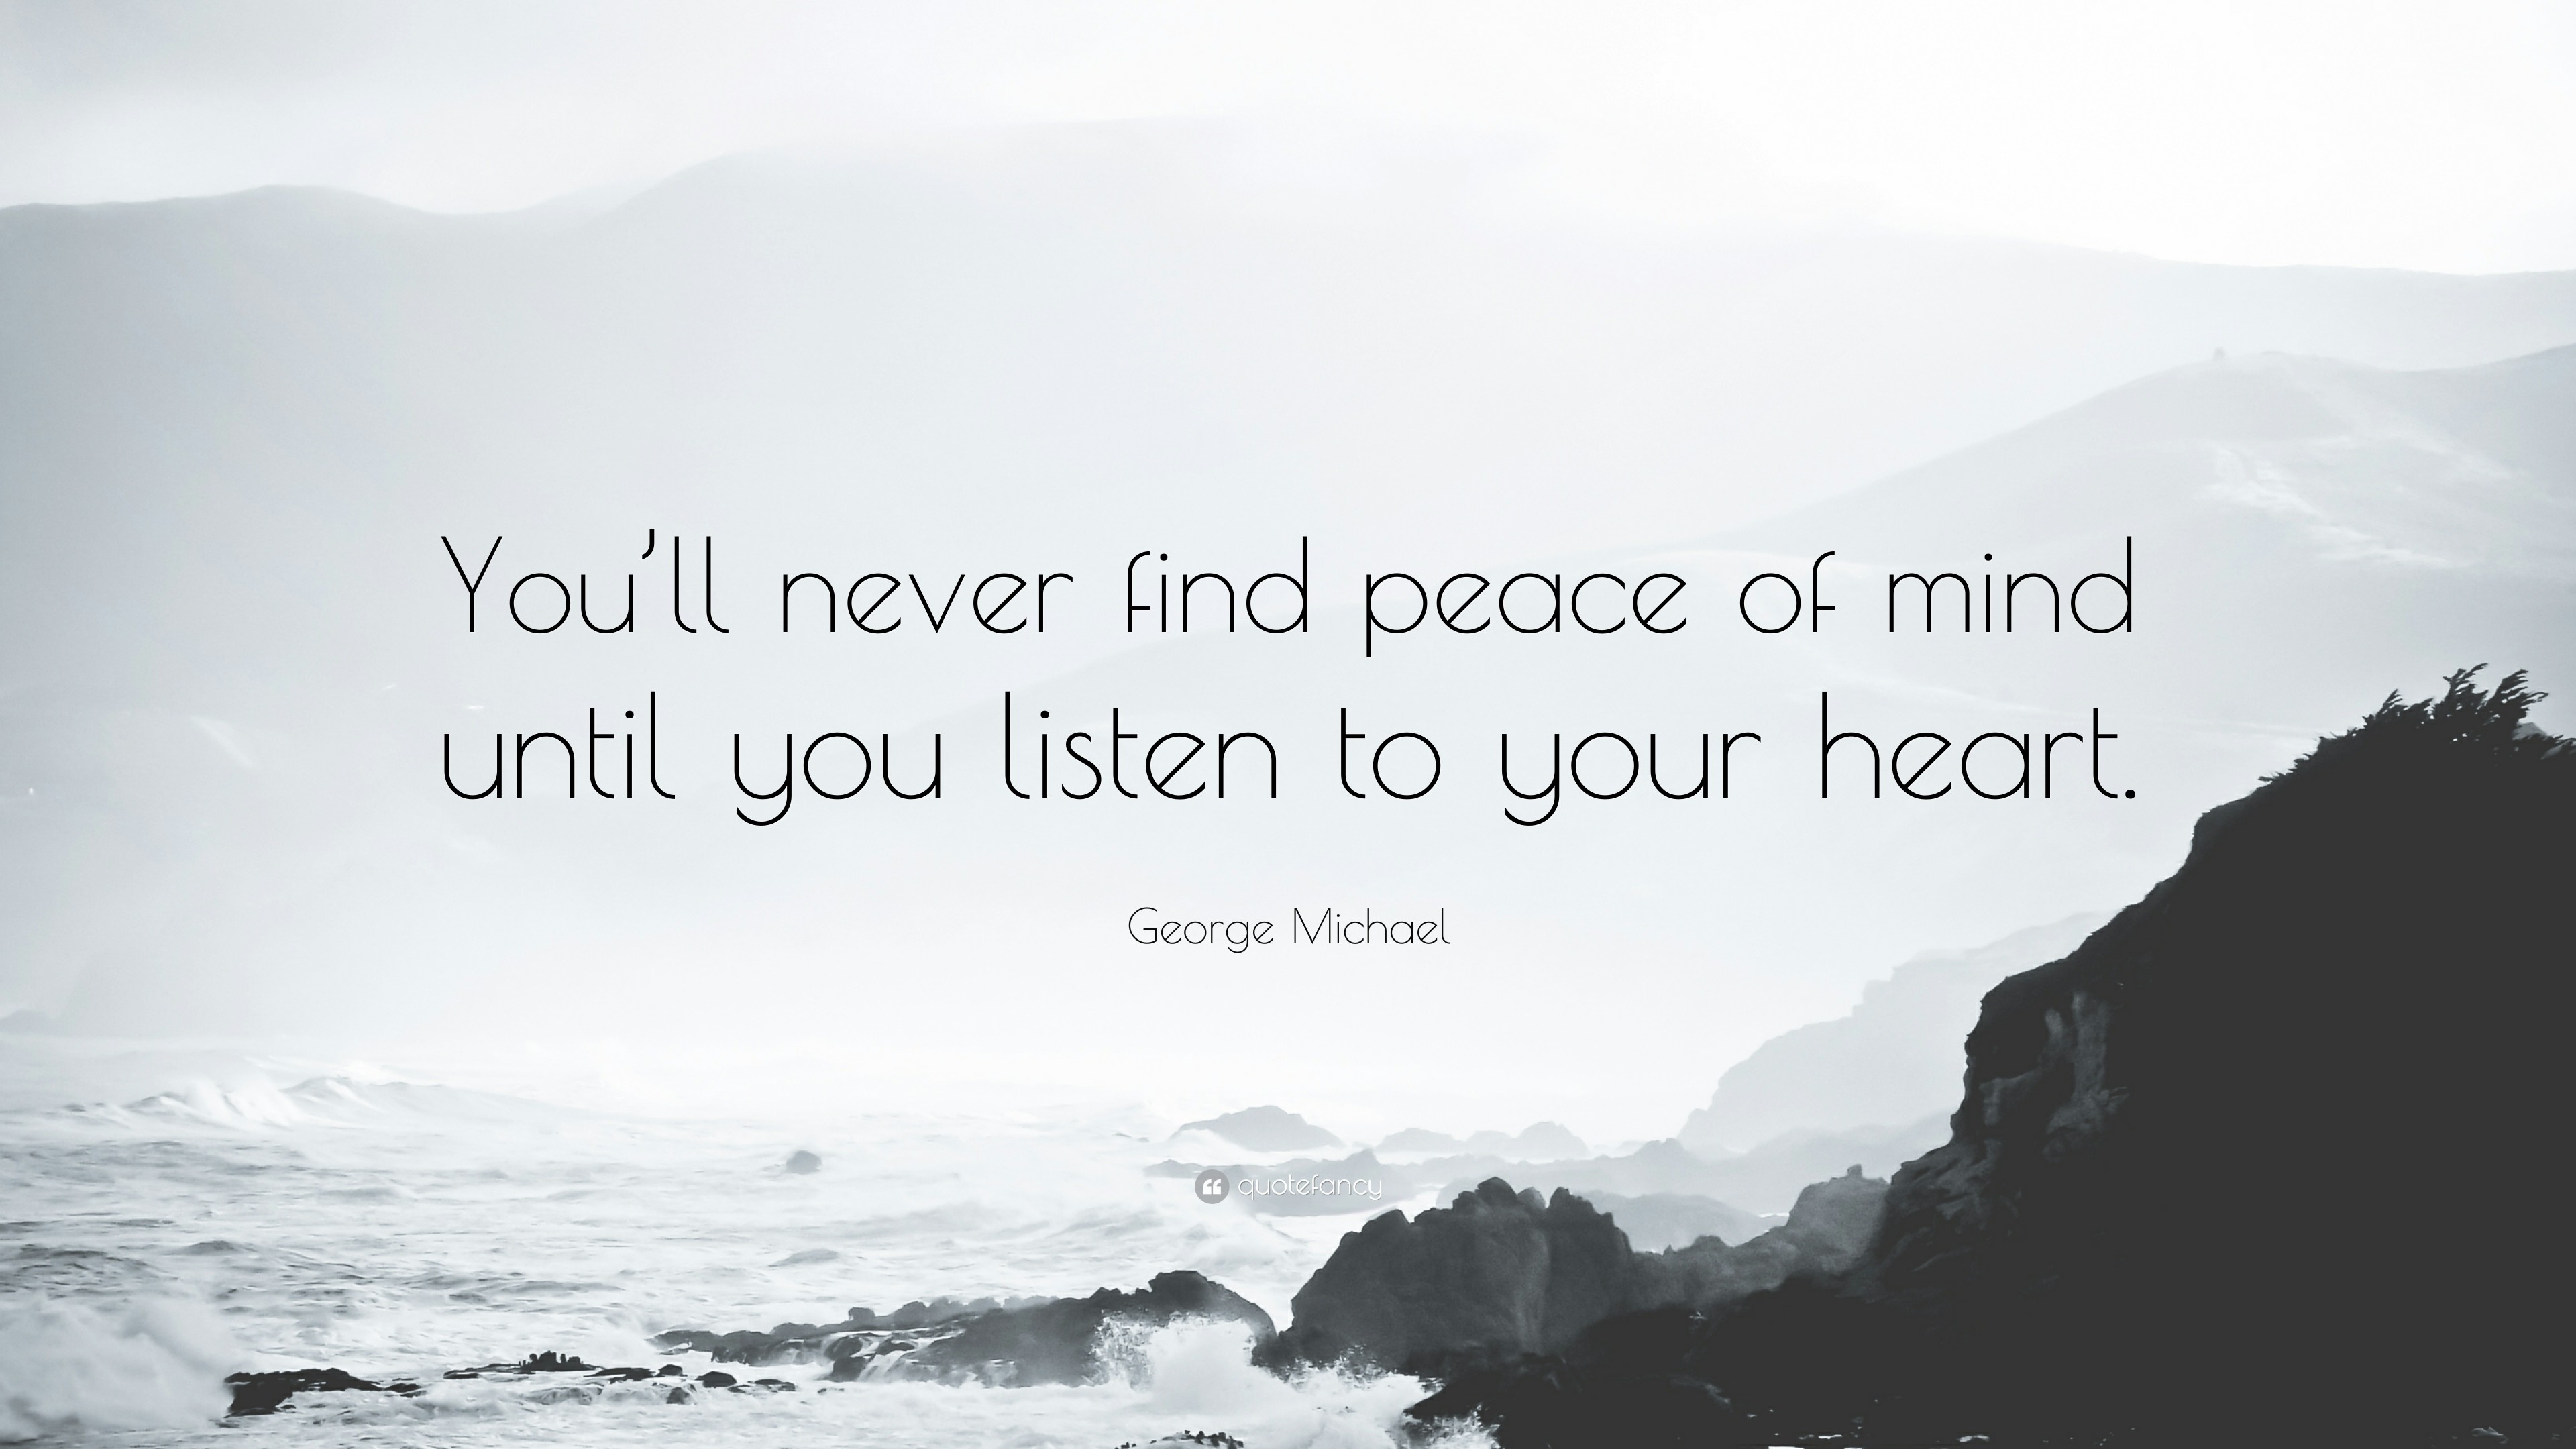 3840x2160 George Michael Quote: “You'll never find peace of mind until you listen